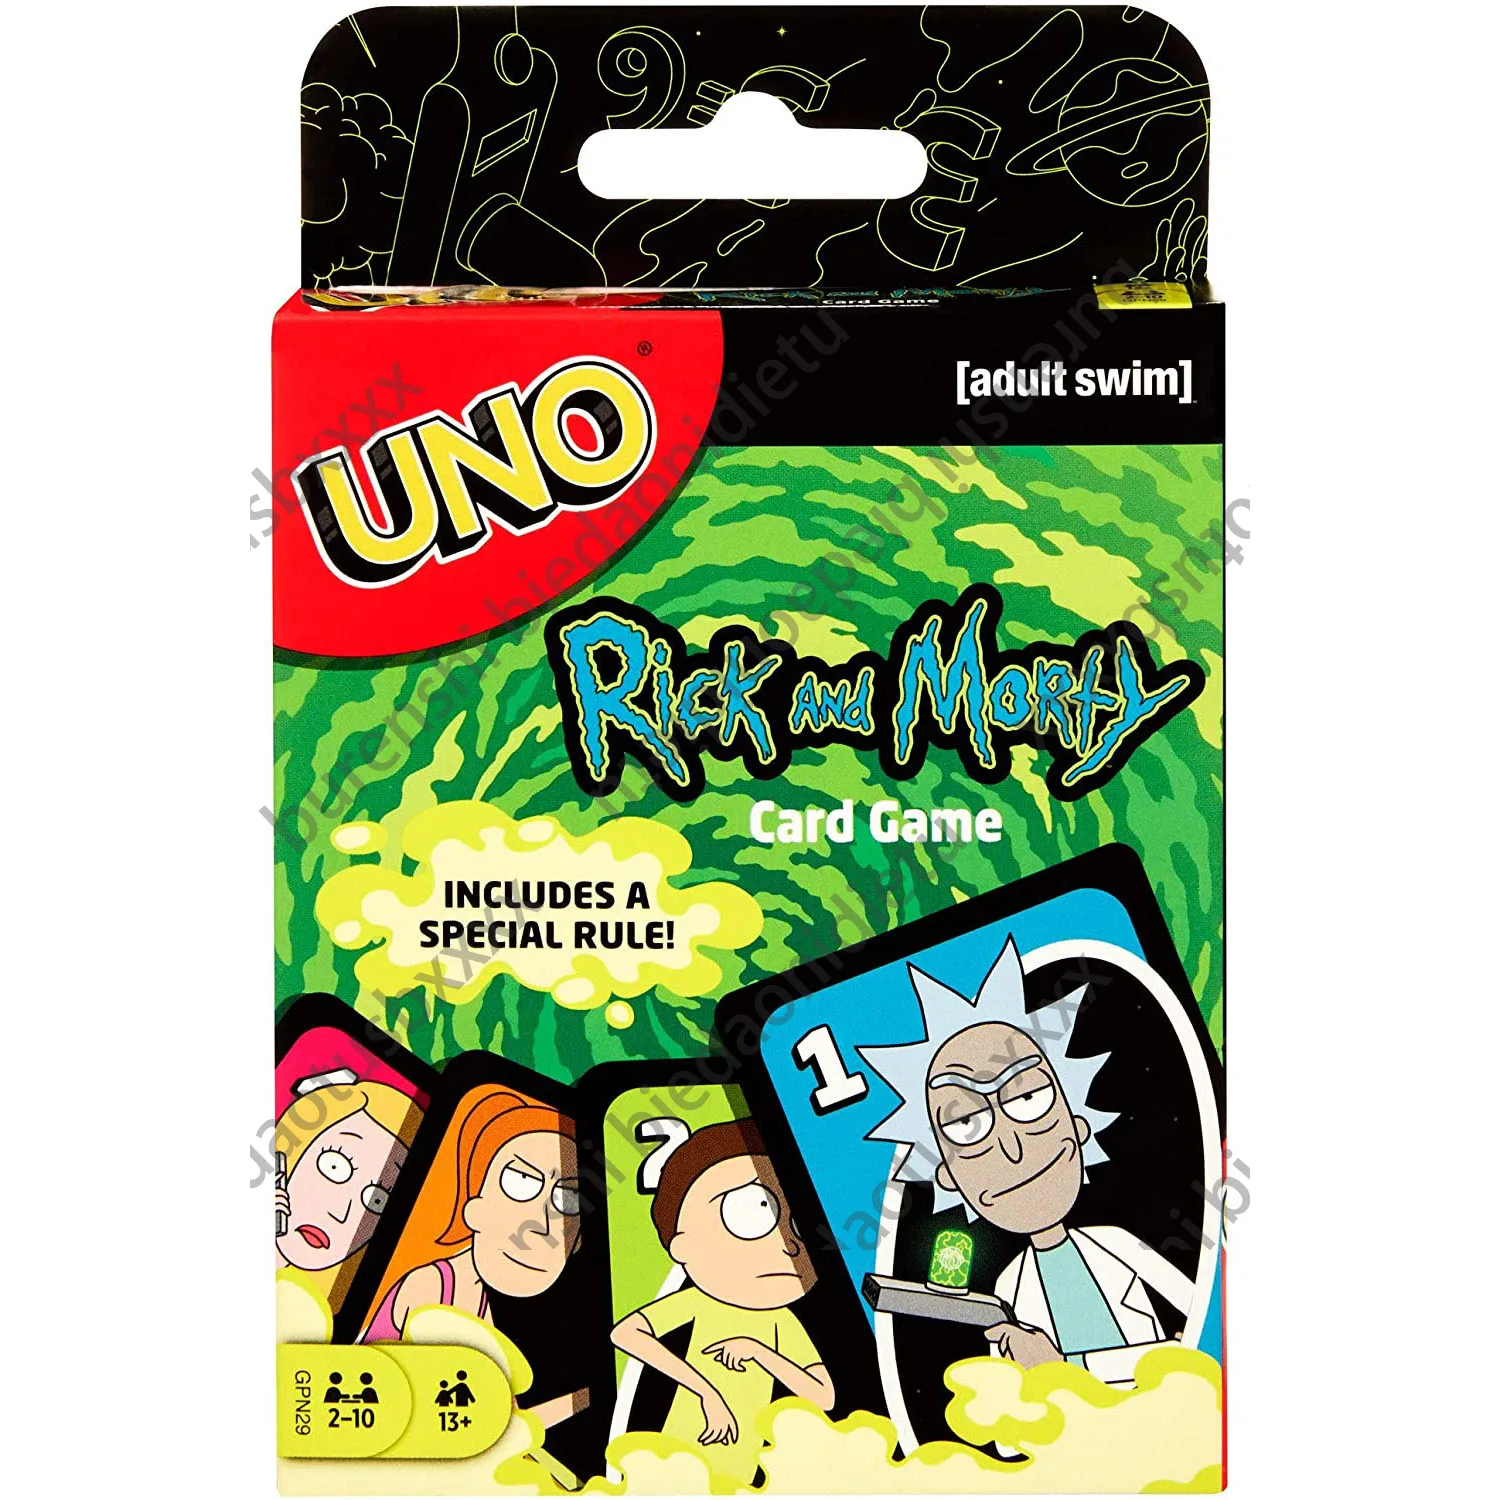 

Mattel Uno: Rick and Morty Entertainment Board Uno Games Fun Poker Playing Cards Gift Box Uno Card Game Toy Gift